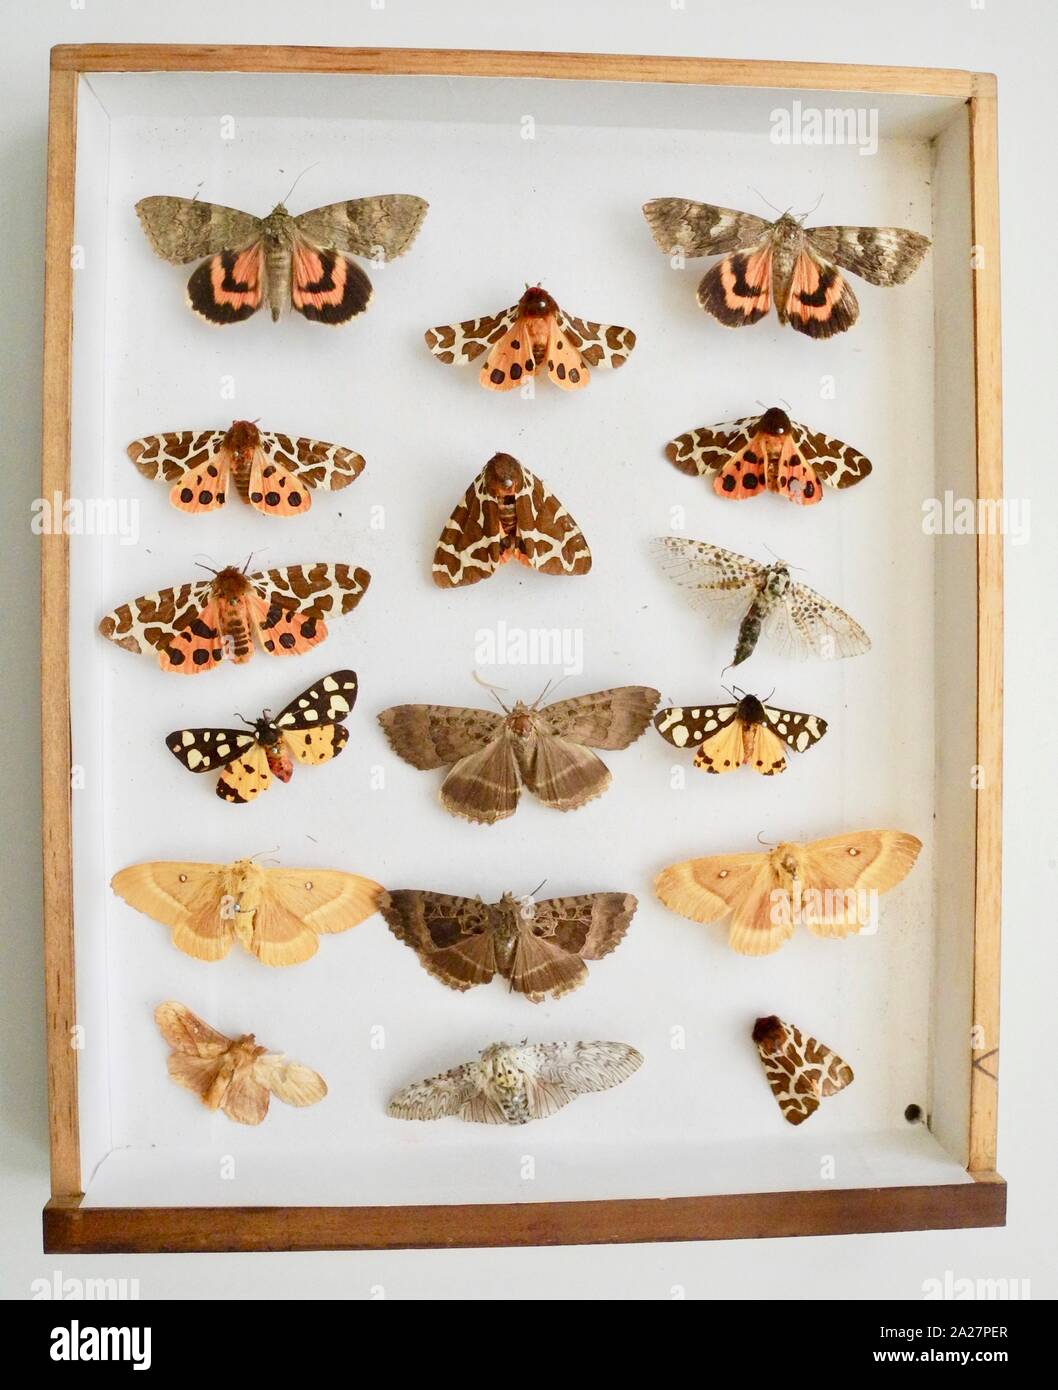 Butterfly collector’s cabinet. A popular pastime particularly for gentlemen in the Victorian and Edwardian eras. Entomologists collected vast numbers of insects and pinned them into specially made cabinets. Continues today but is less politically correct as cameras can preserve all of the detail without destroying the subject. Stock Photo